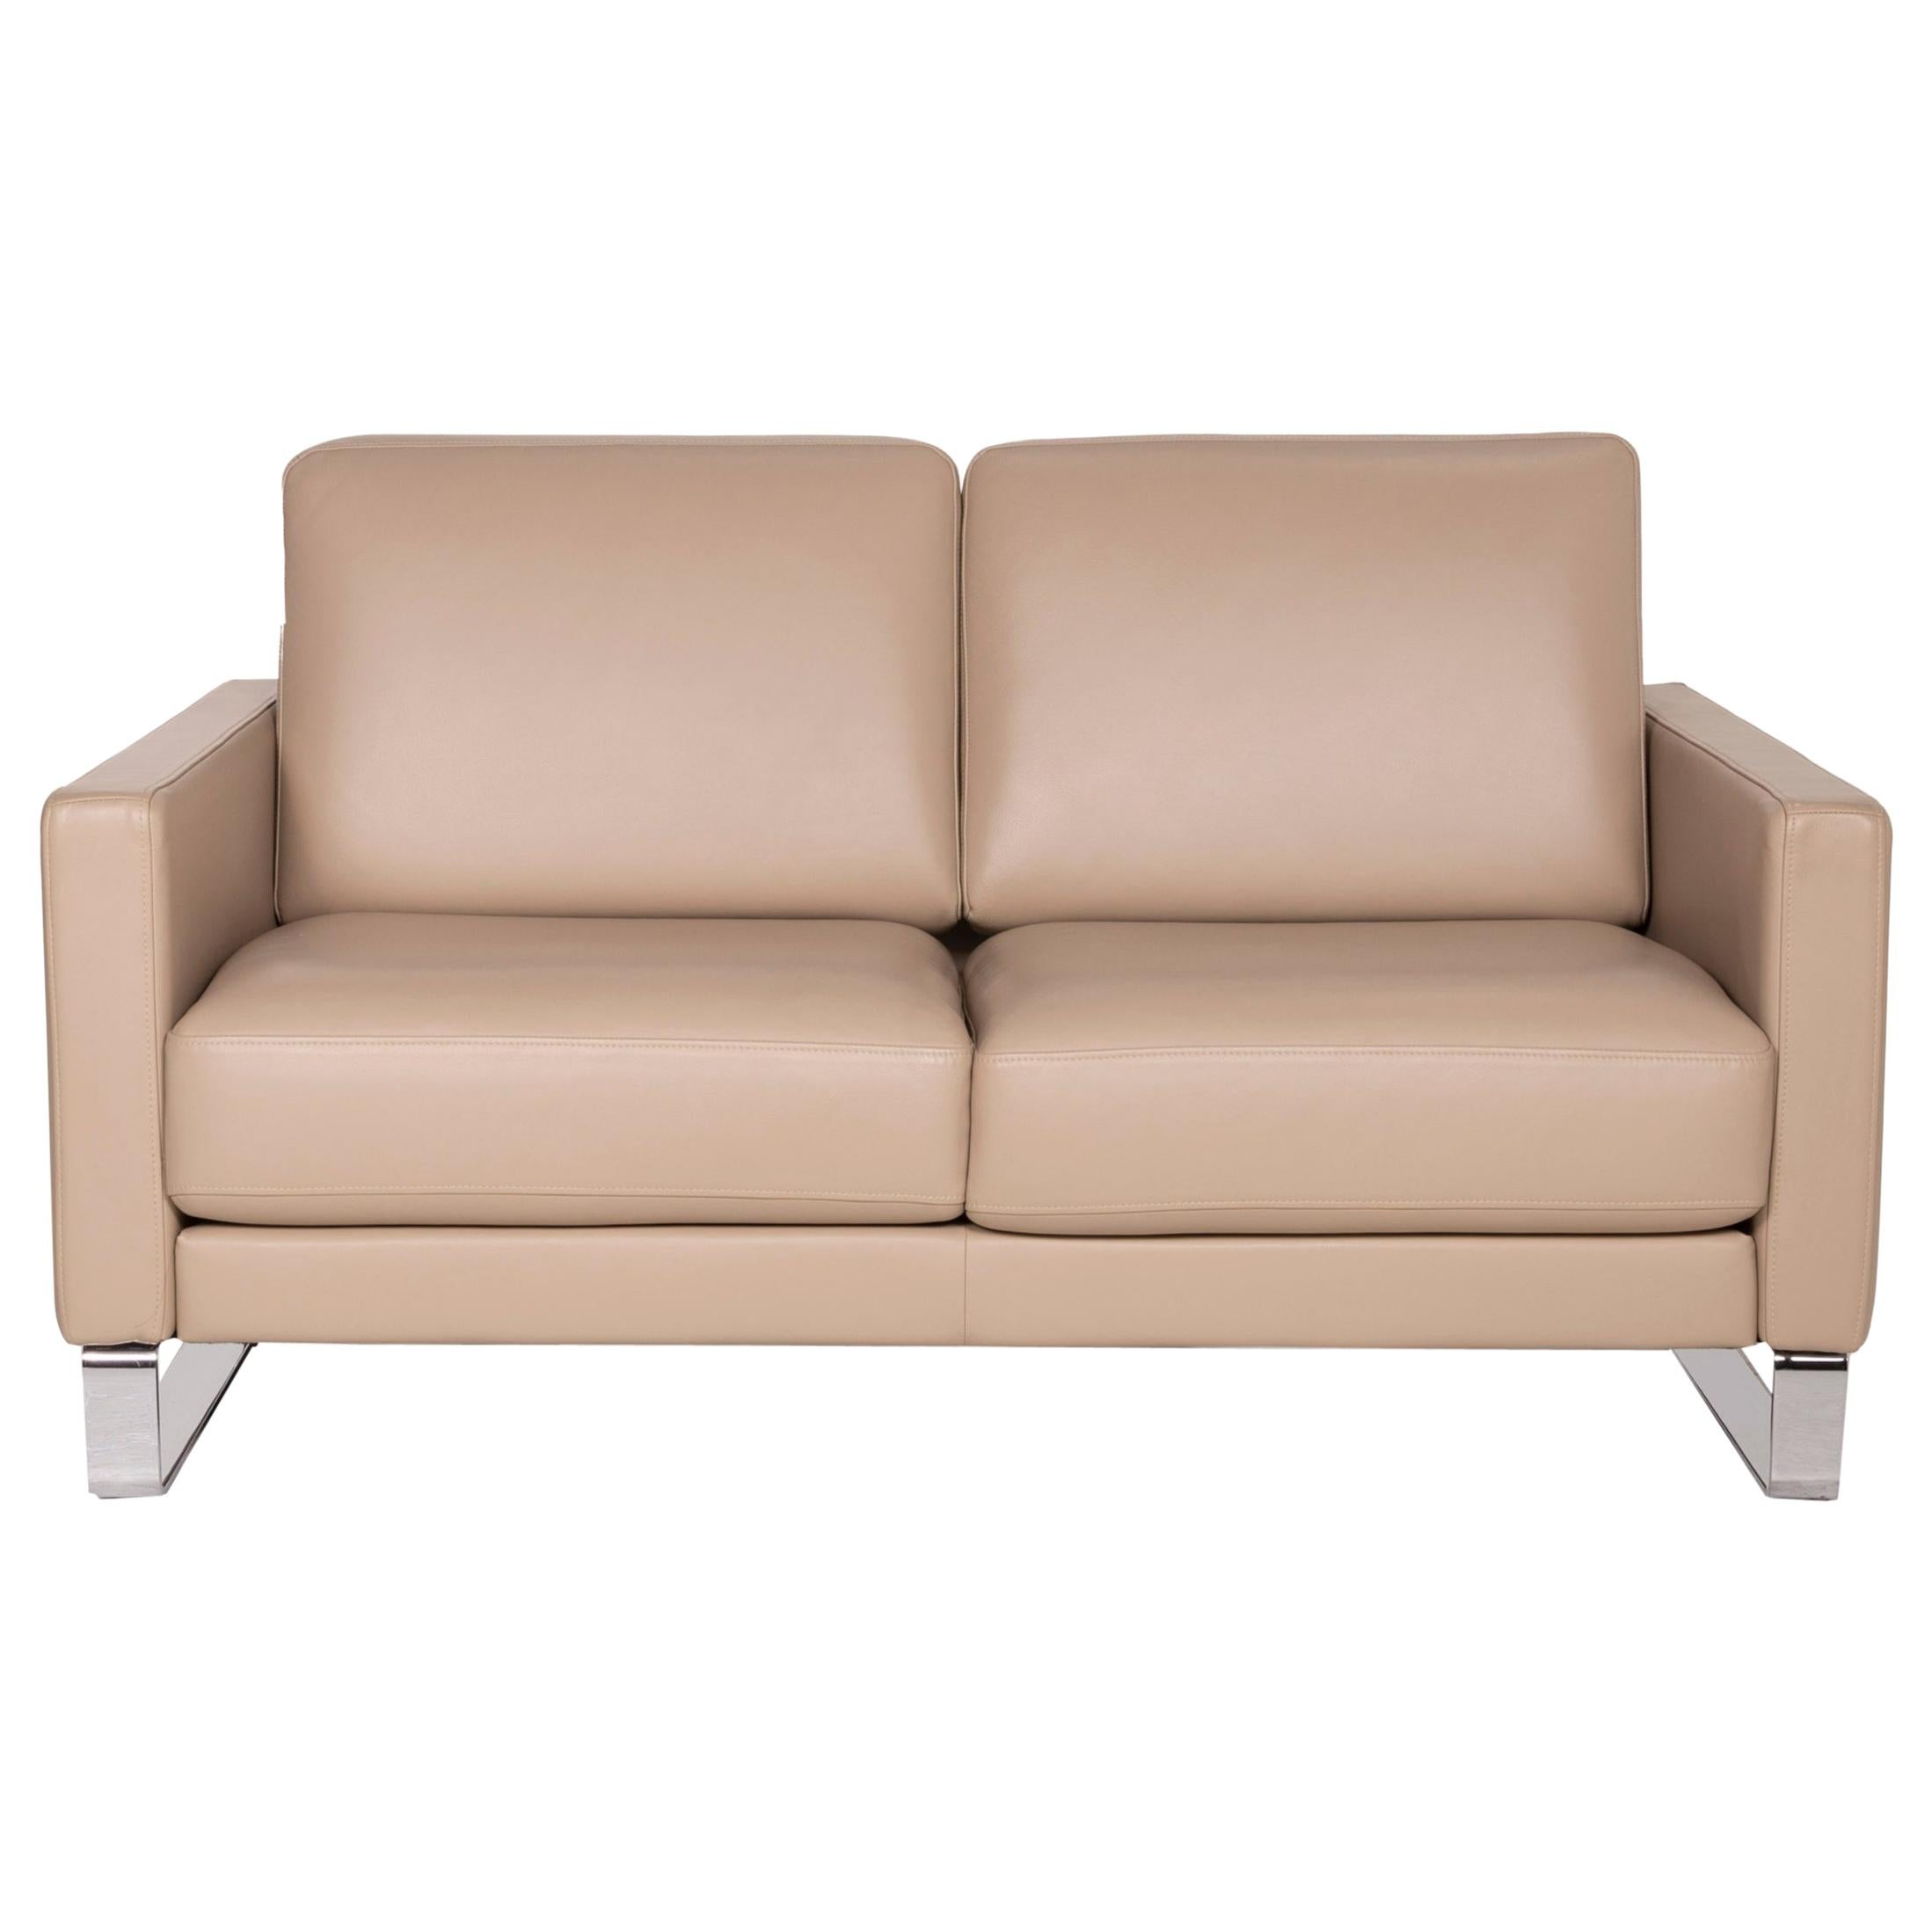 Rolf Benz Ego Leather Sofa Brown Two-Seater For Sale